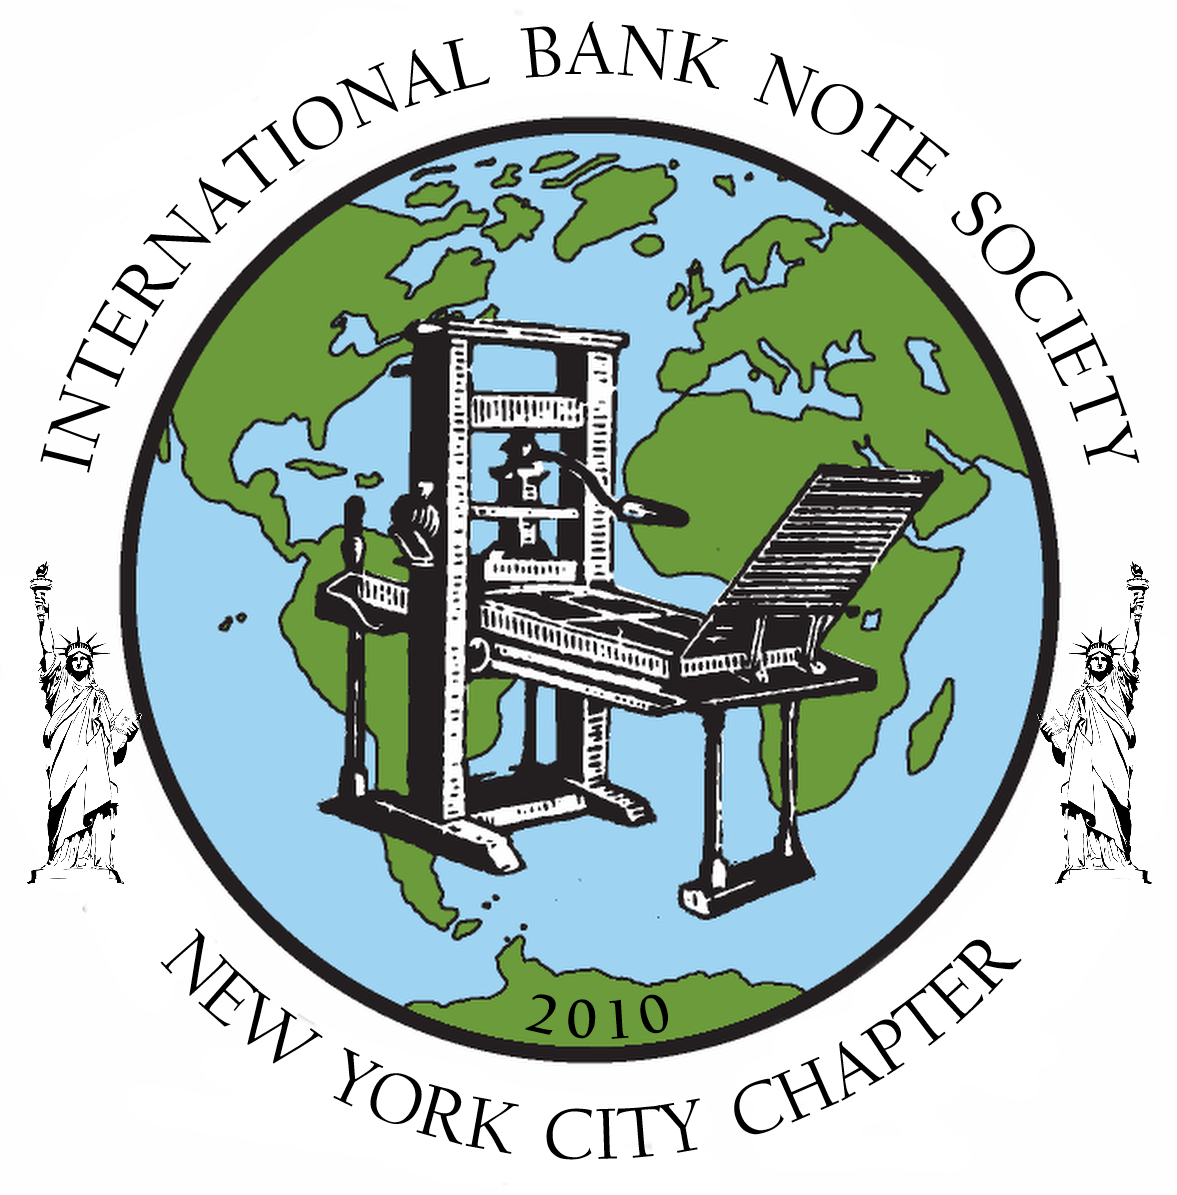 NYC CHAPTER LOGO